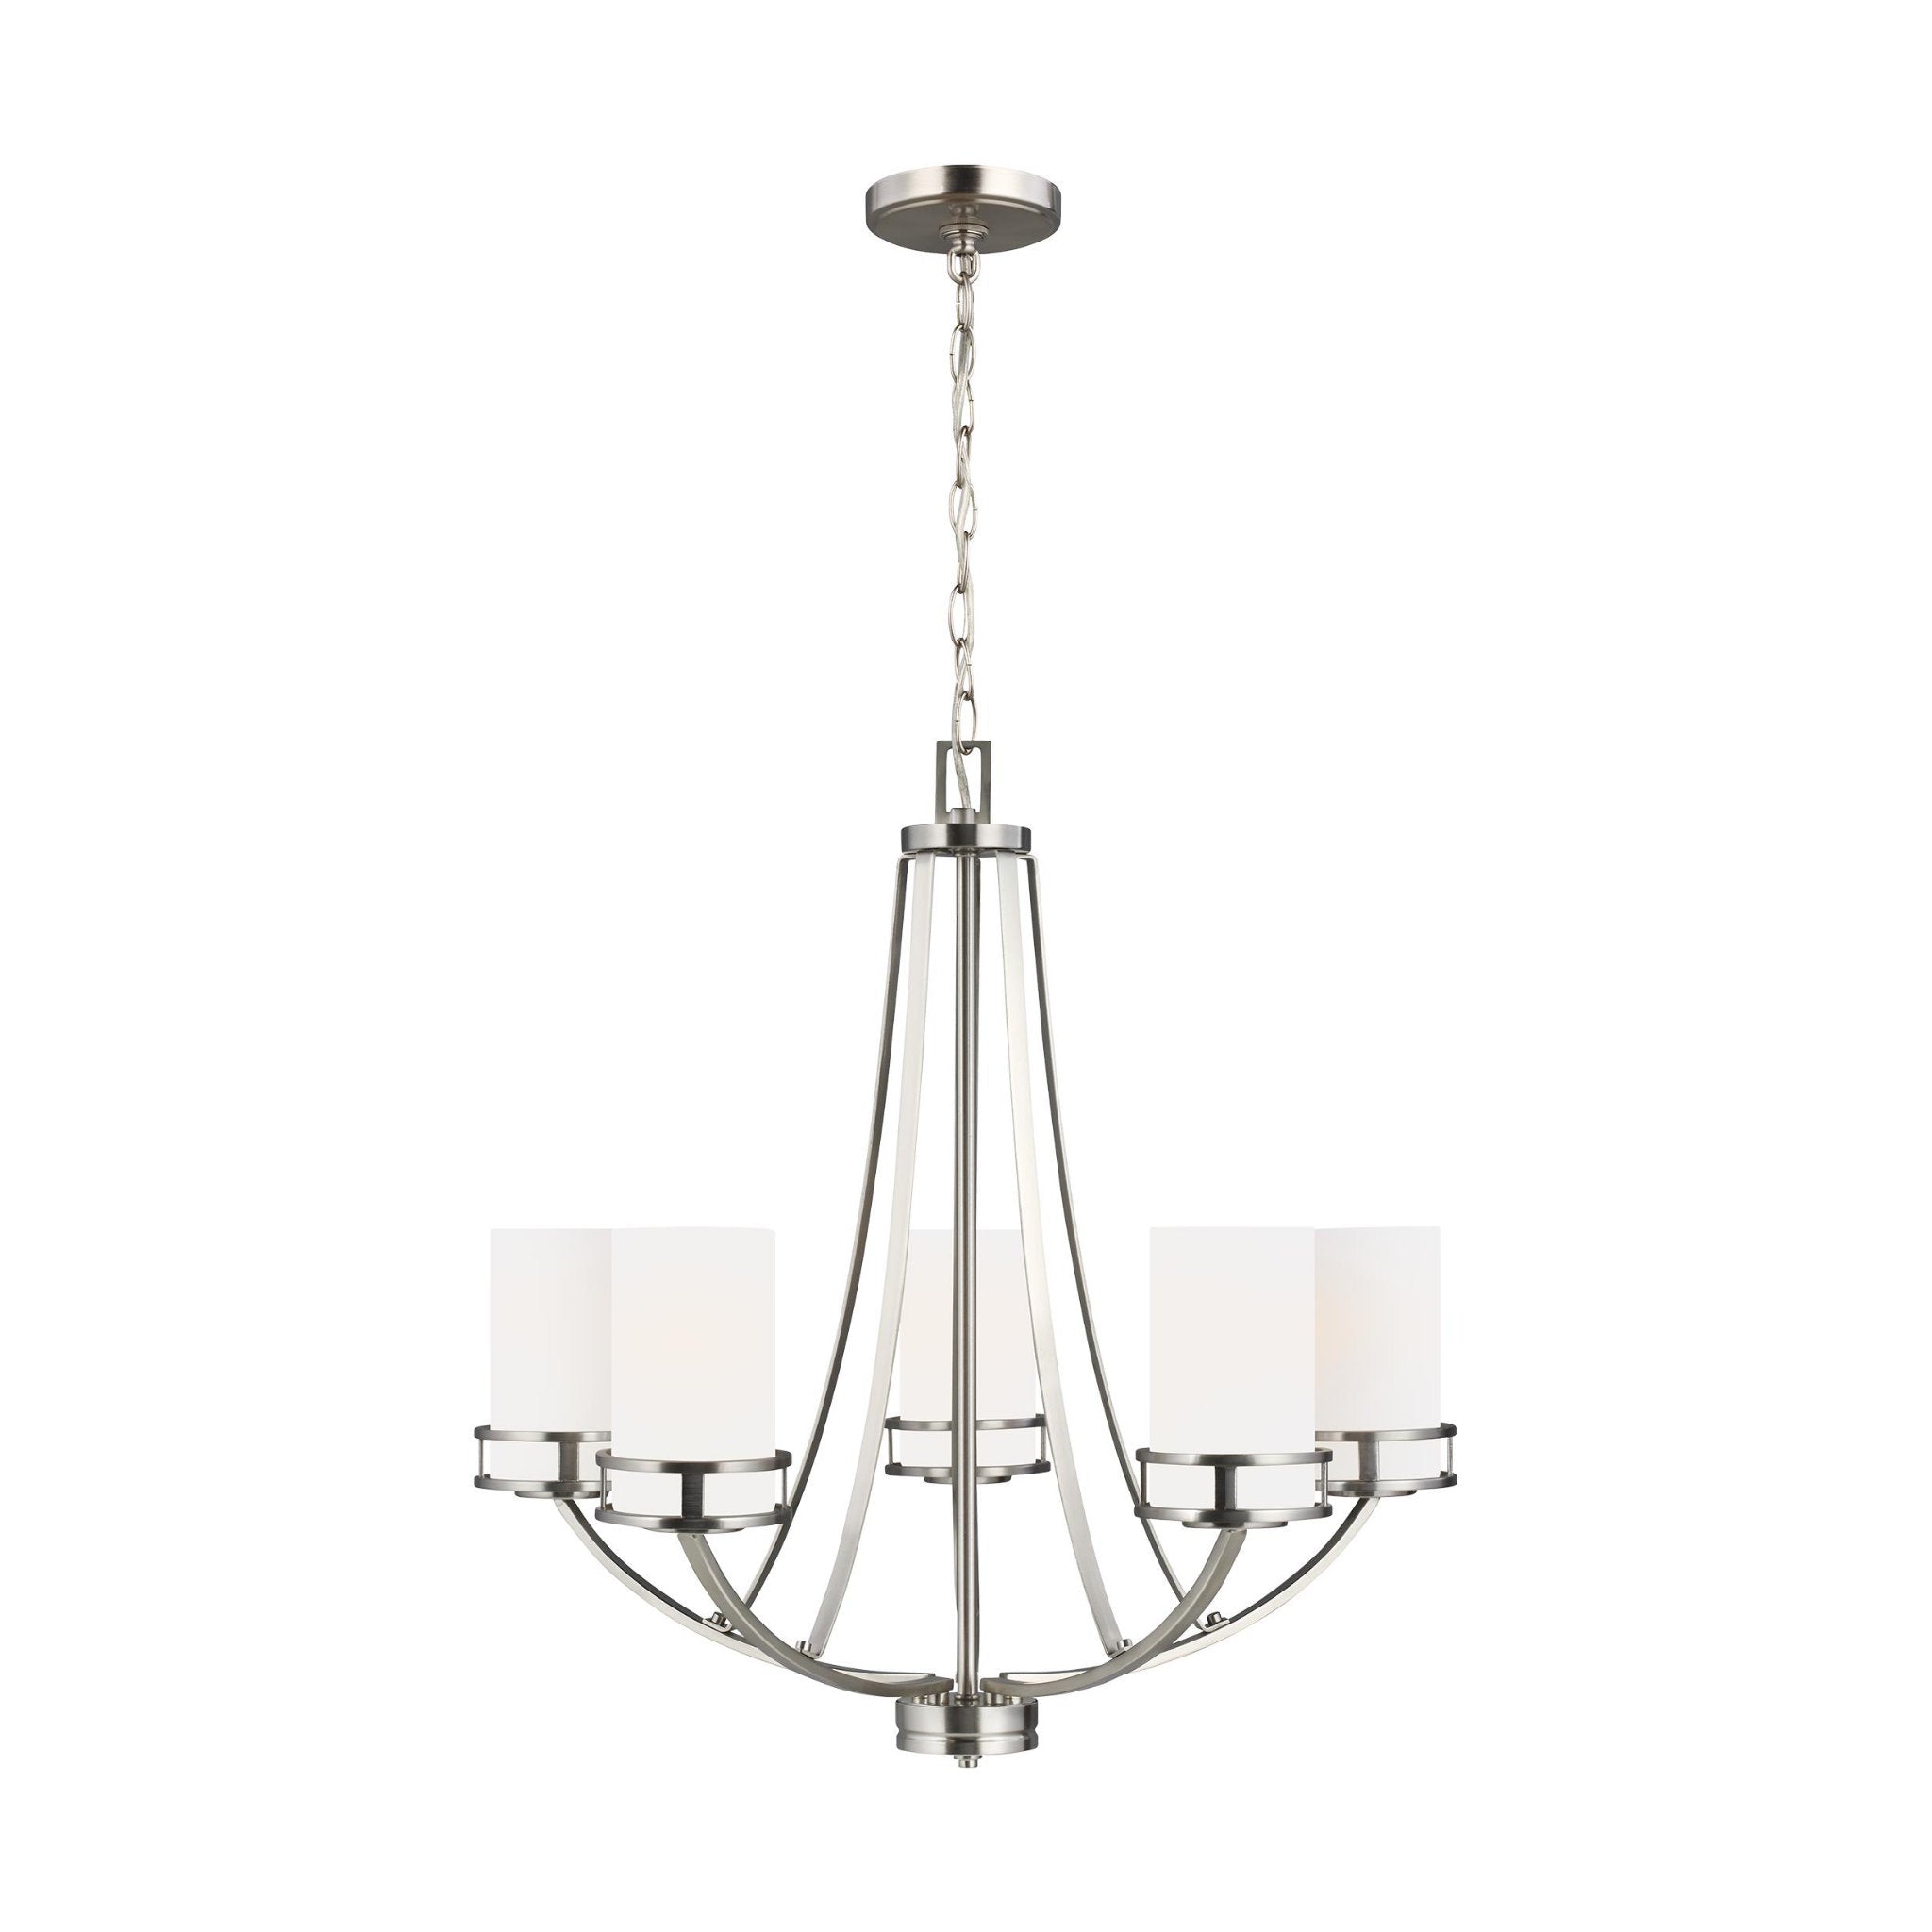 Robie Five Light Chandelier Transitional 23.375" Height Steel Round Etched / White Inside Shade in Brushed Nickel